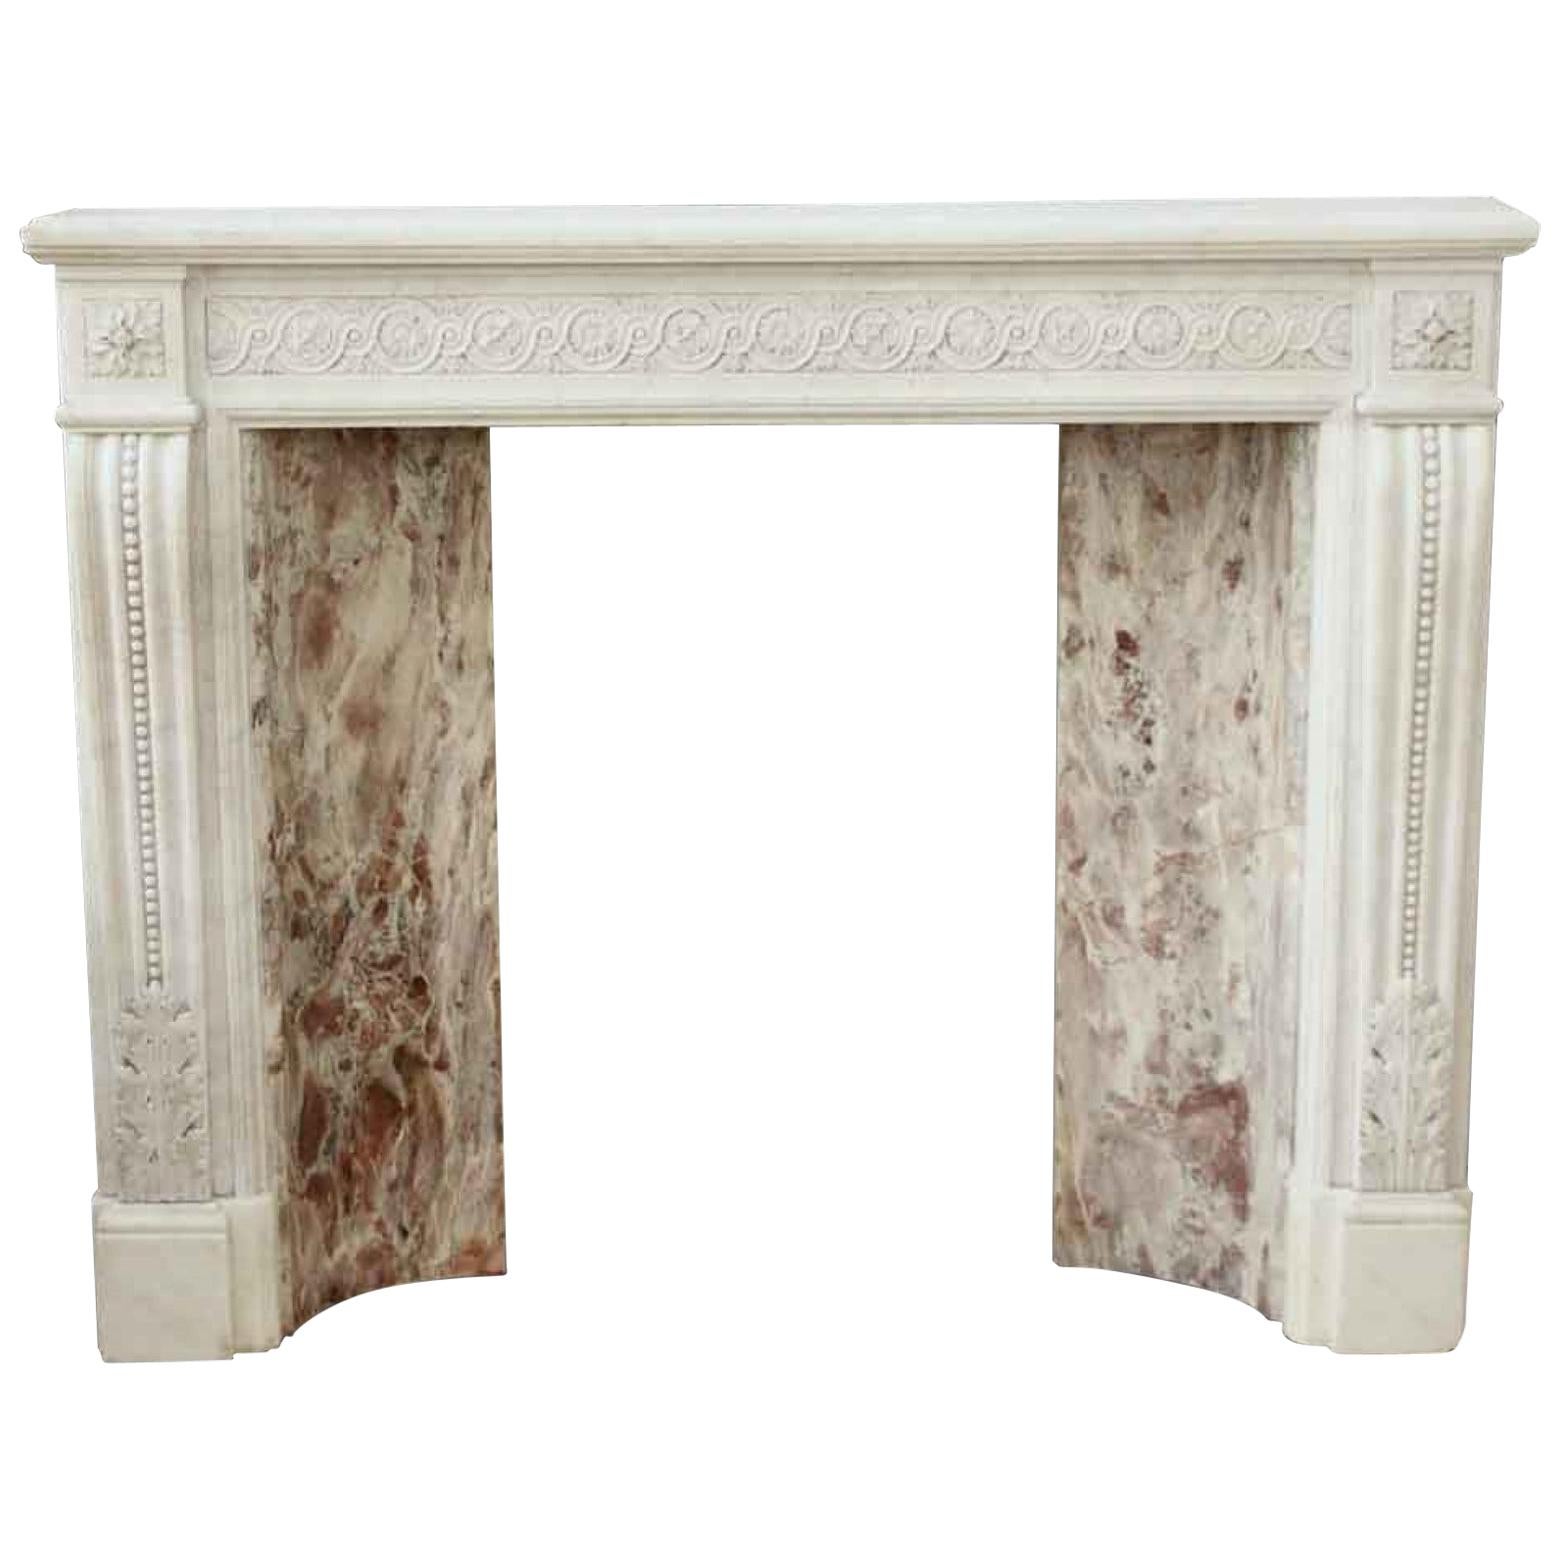 1880s Small Victorian White Carrara Marble Mantel Hand Carved Details For Sale